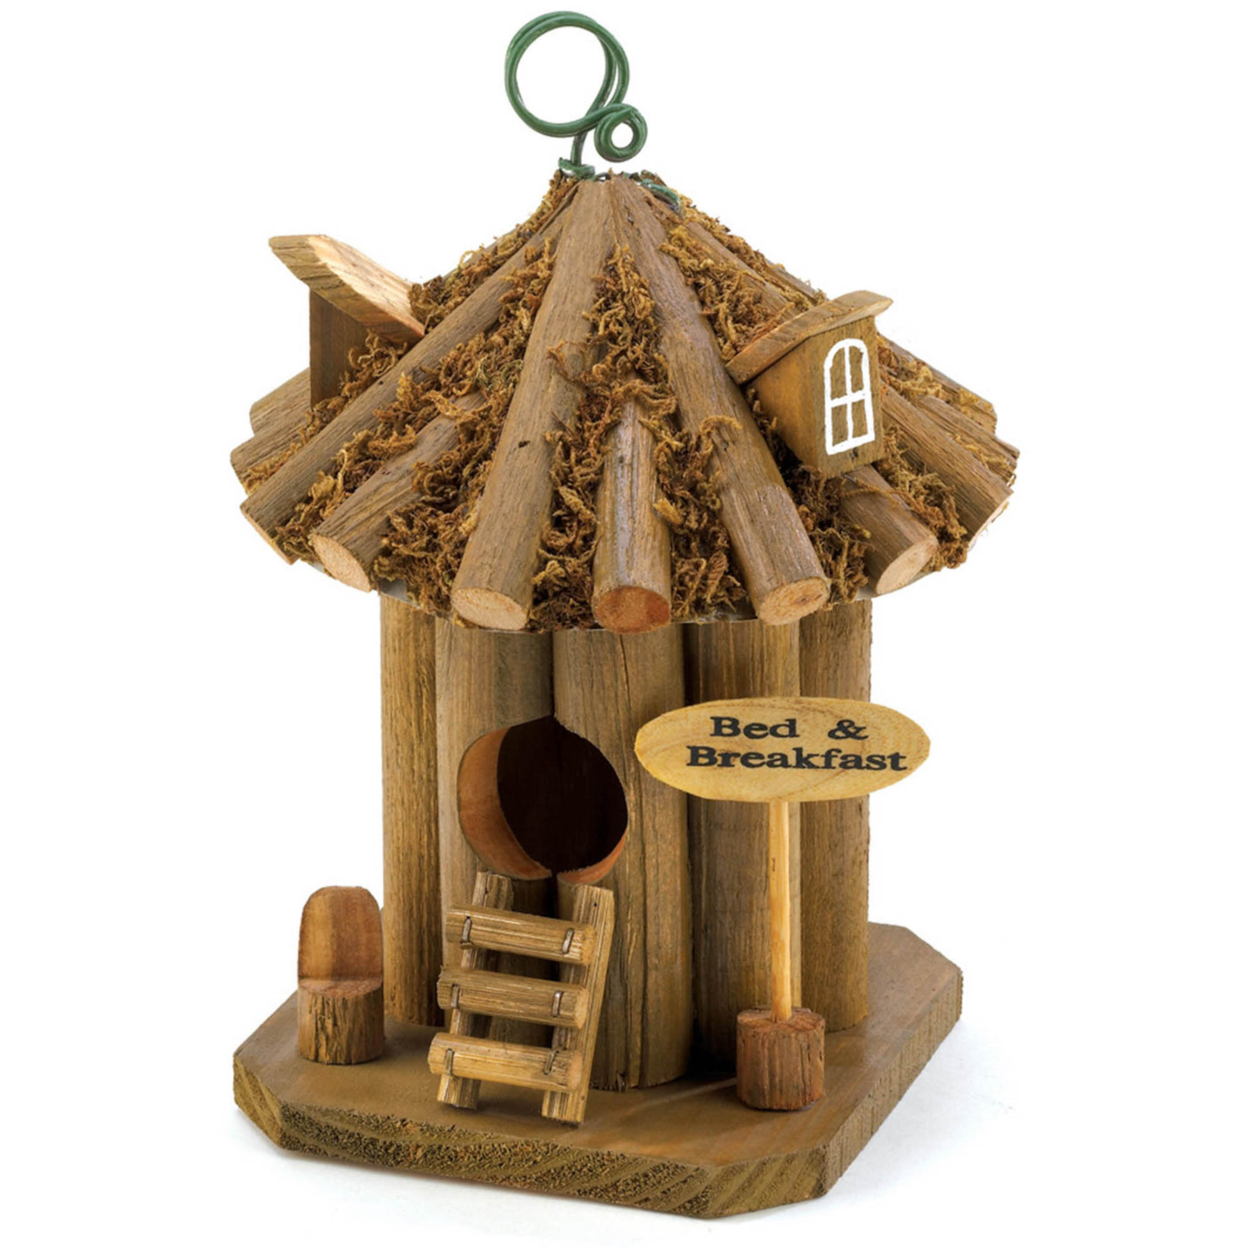 Home Decorative Bed And Breakfast Wood Birdhouse - Brown - image 1 of 5